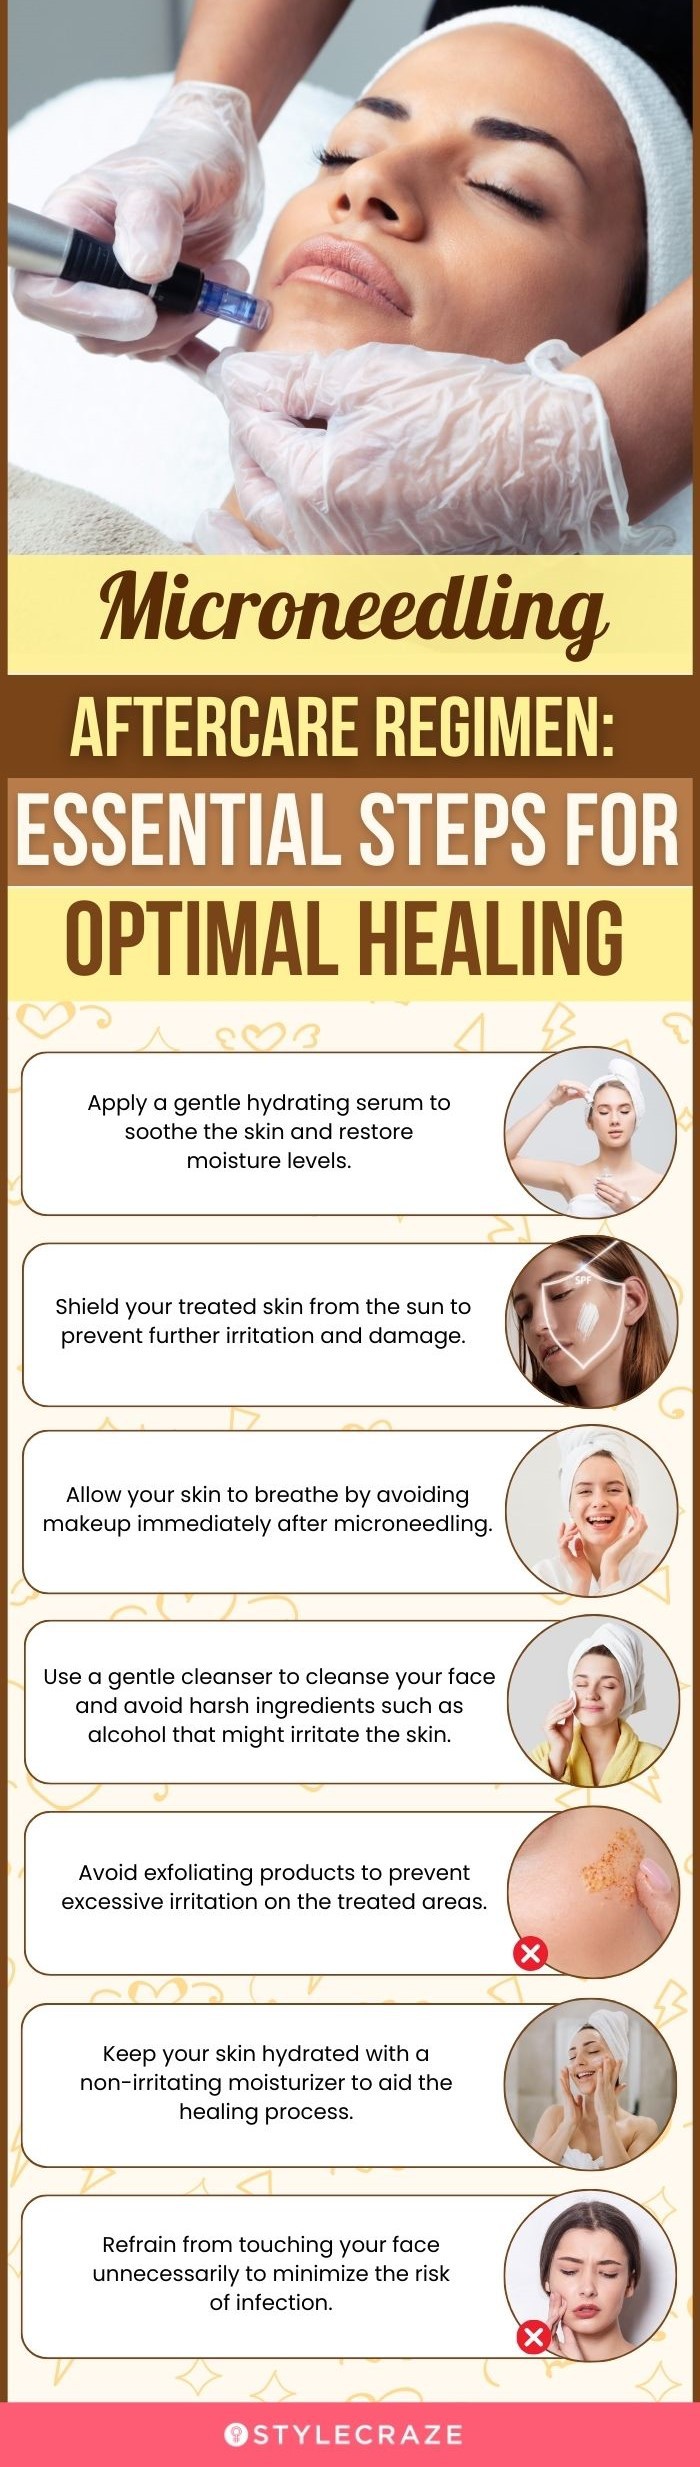 Microneedling Aftercare Regimen: Essential Steps For Optimal Healing (infographic)